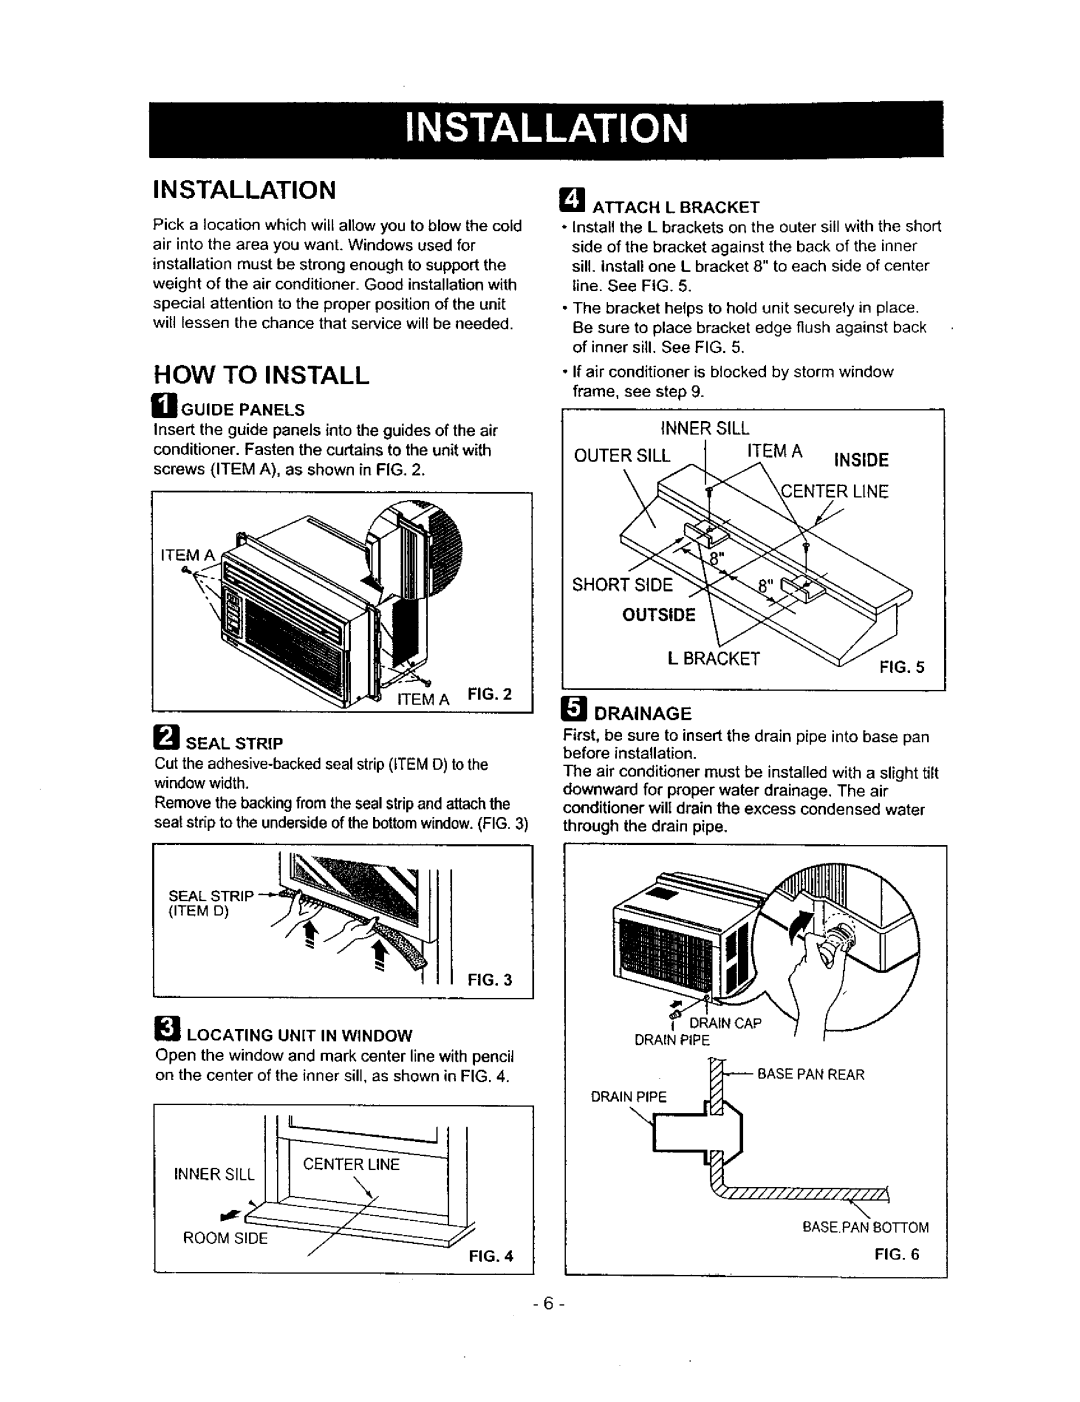 Kenmore 580.71056 owner manual Installation, How To Install, Enter Line, U Guide Panels, L Attach L Bracket 